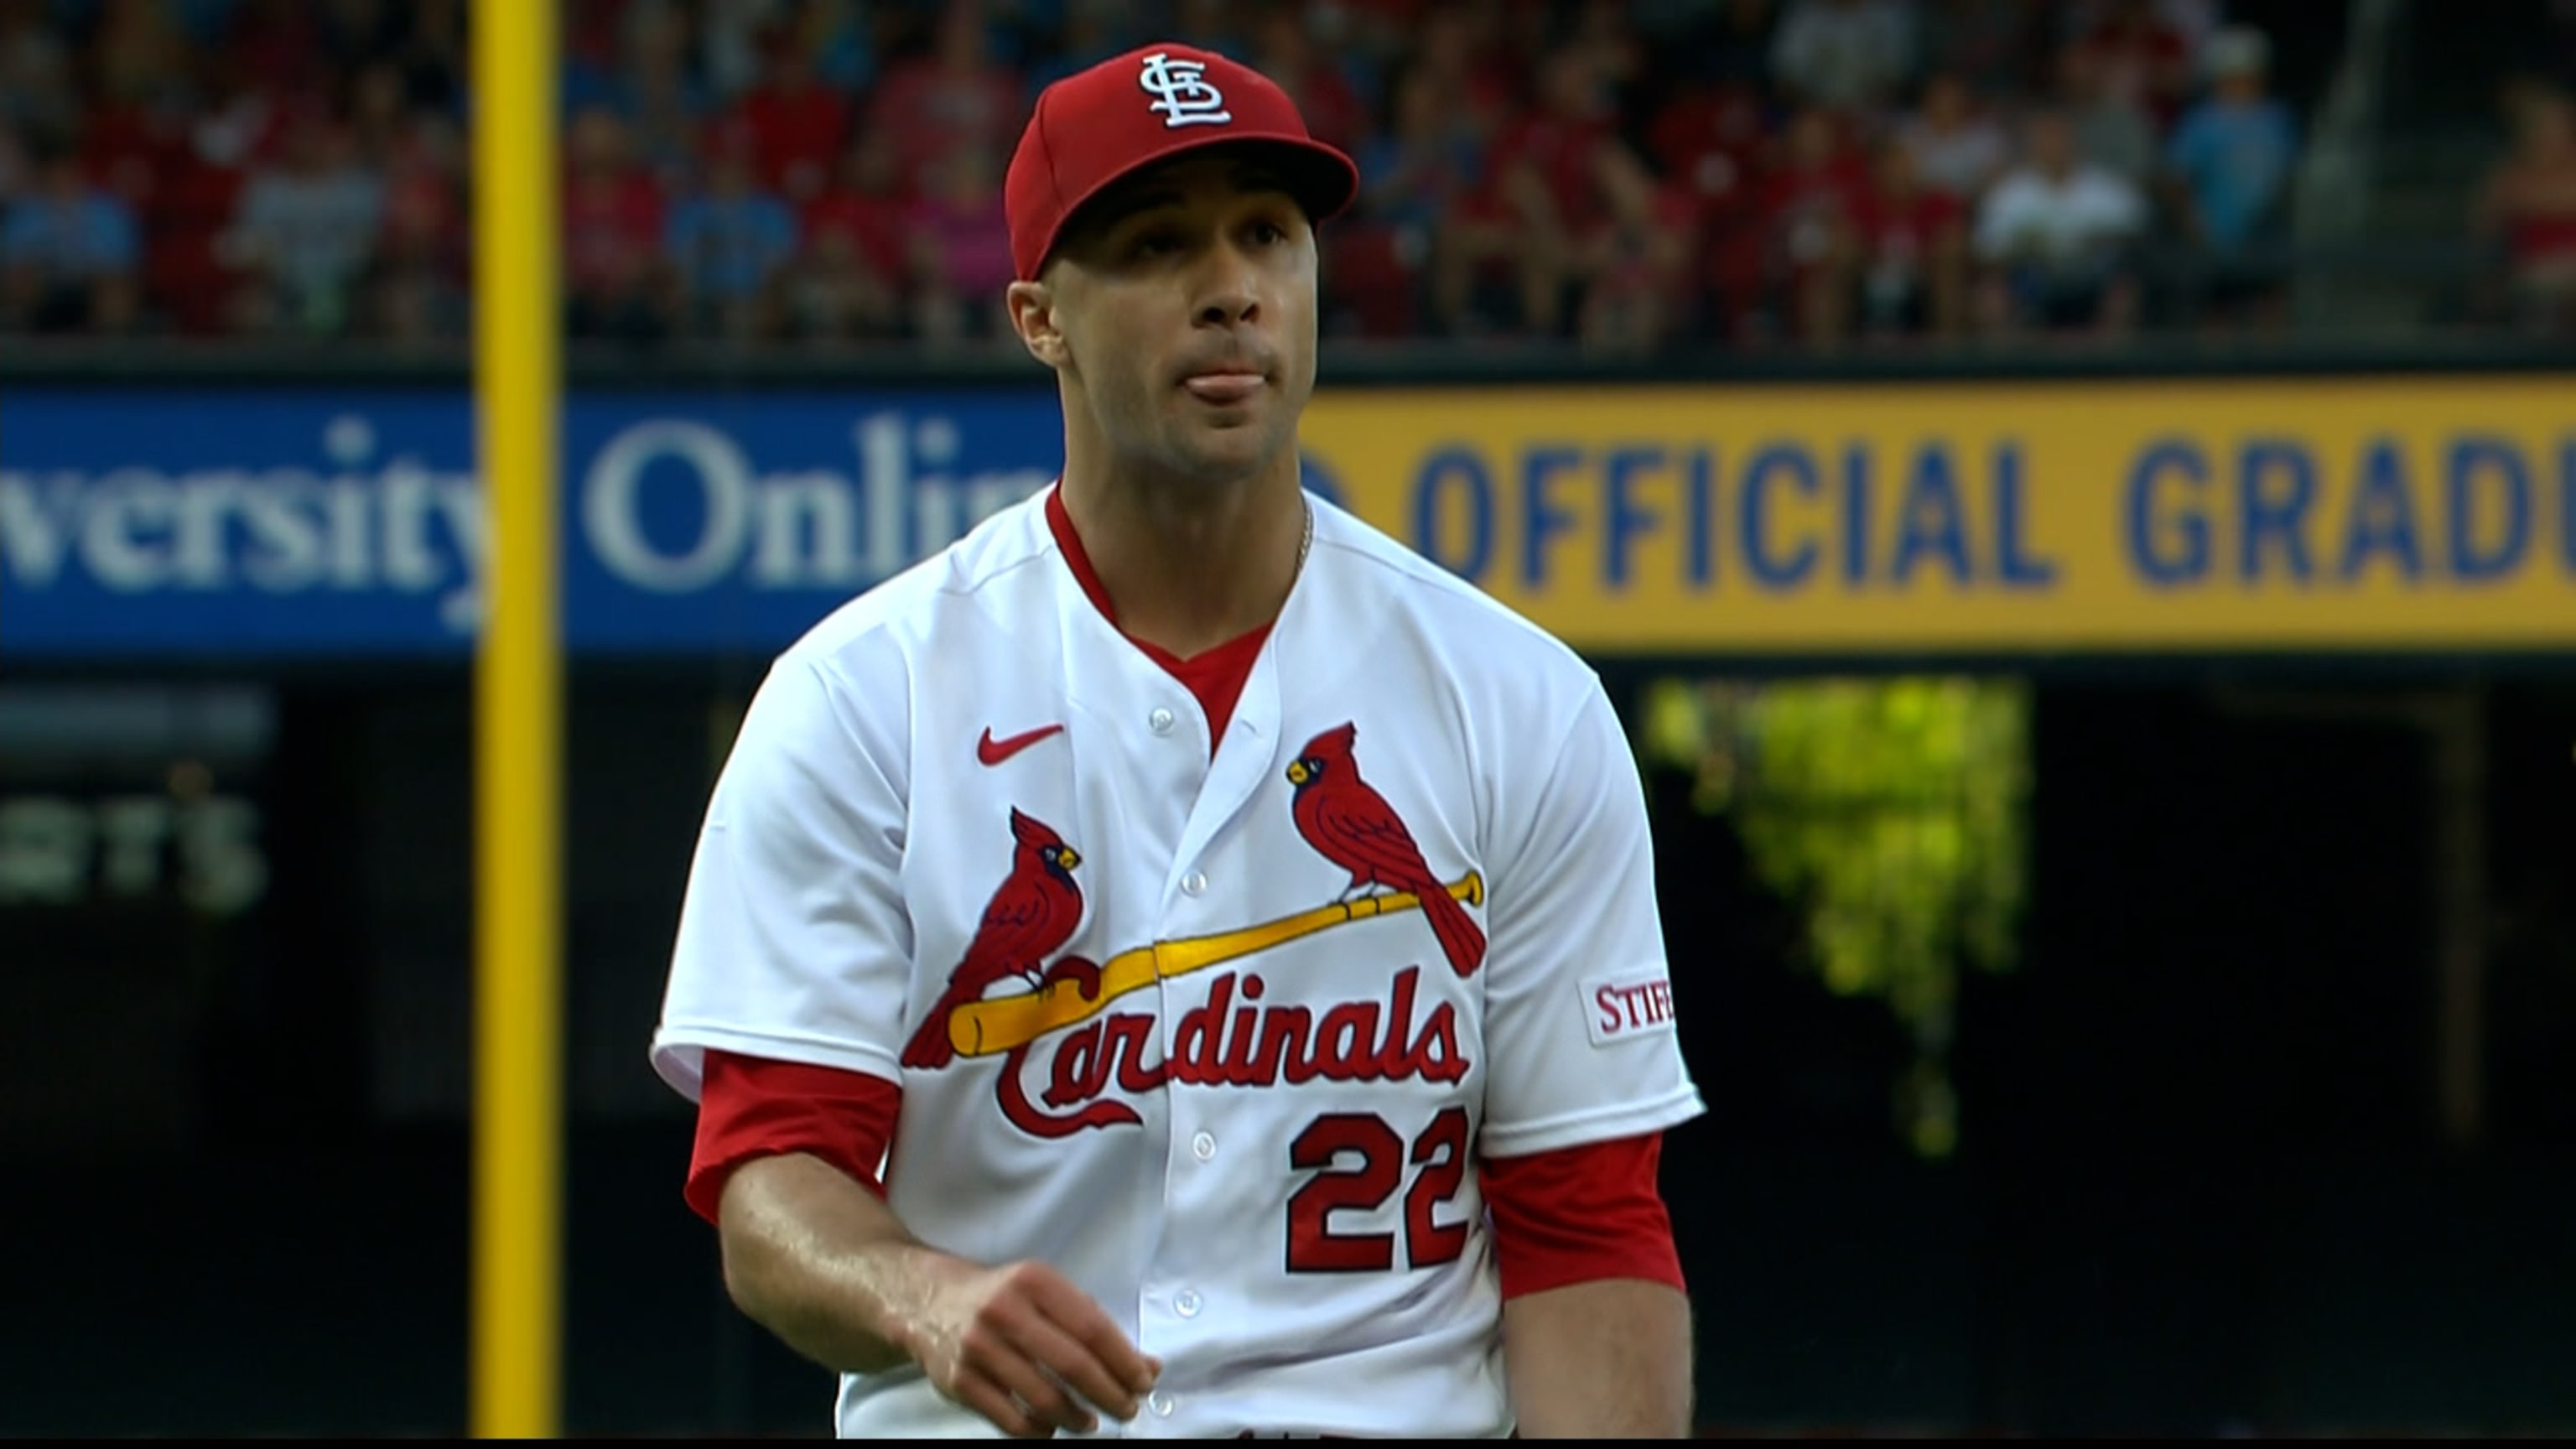 Floundering Cardinals face rough schedule as they attempt to